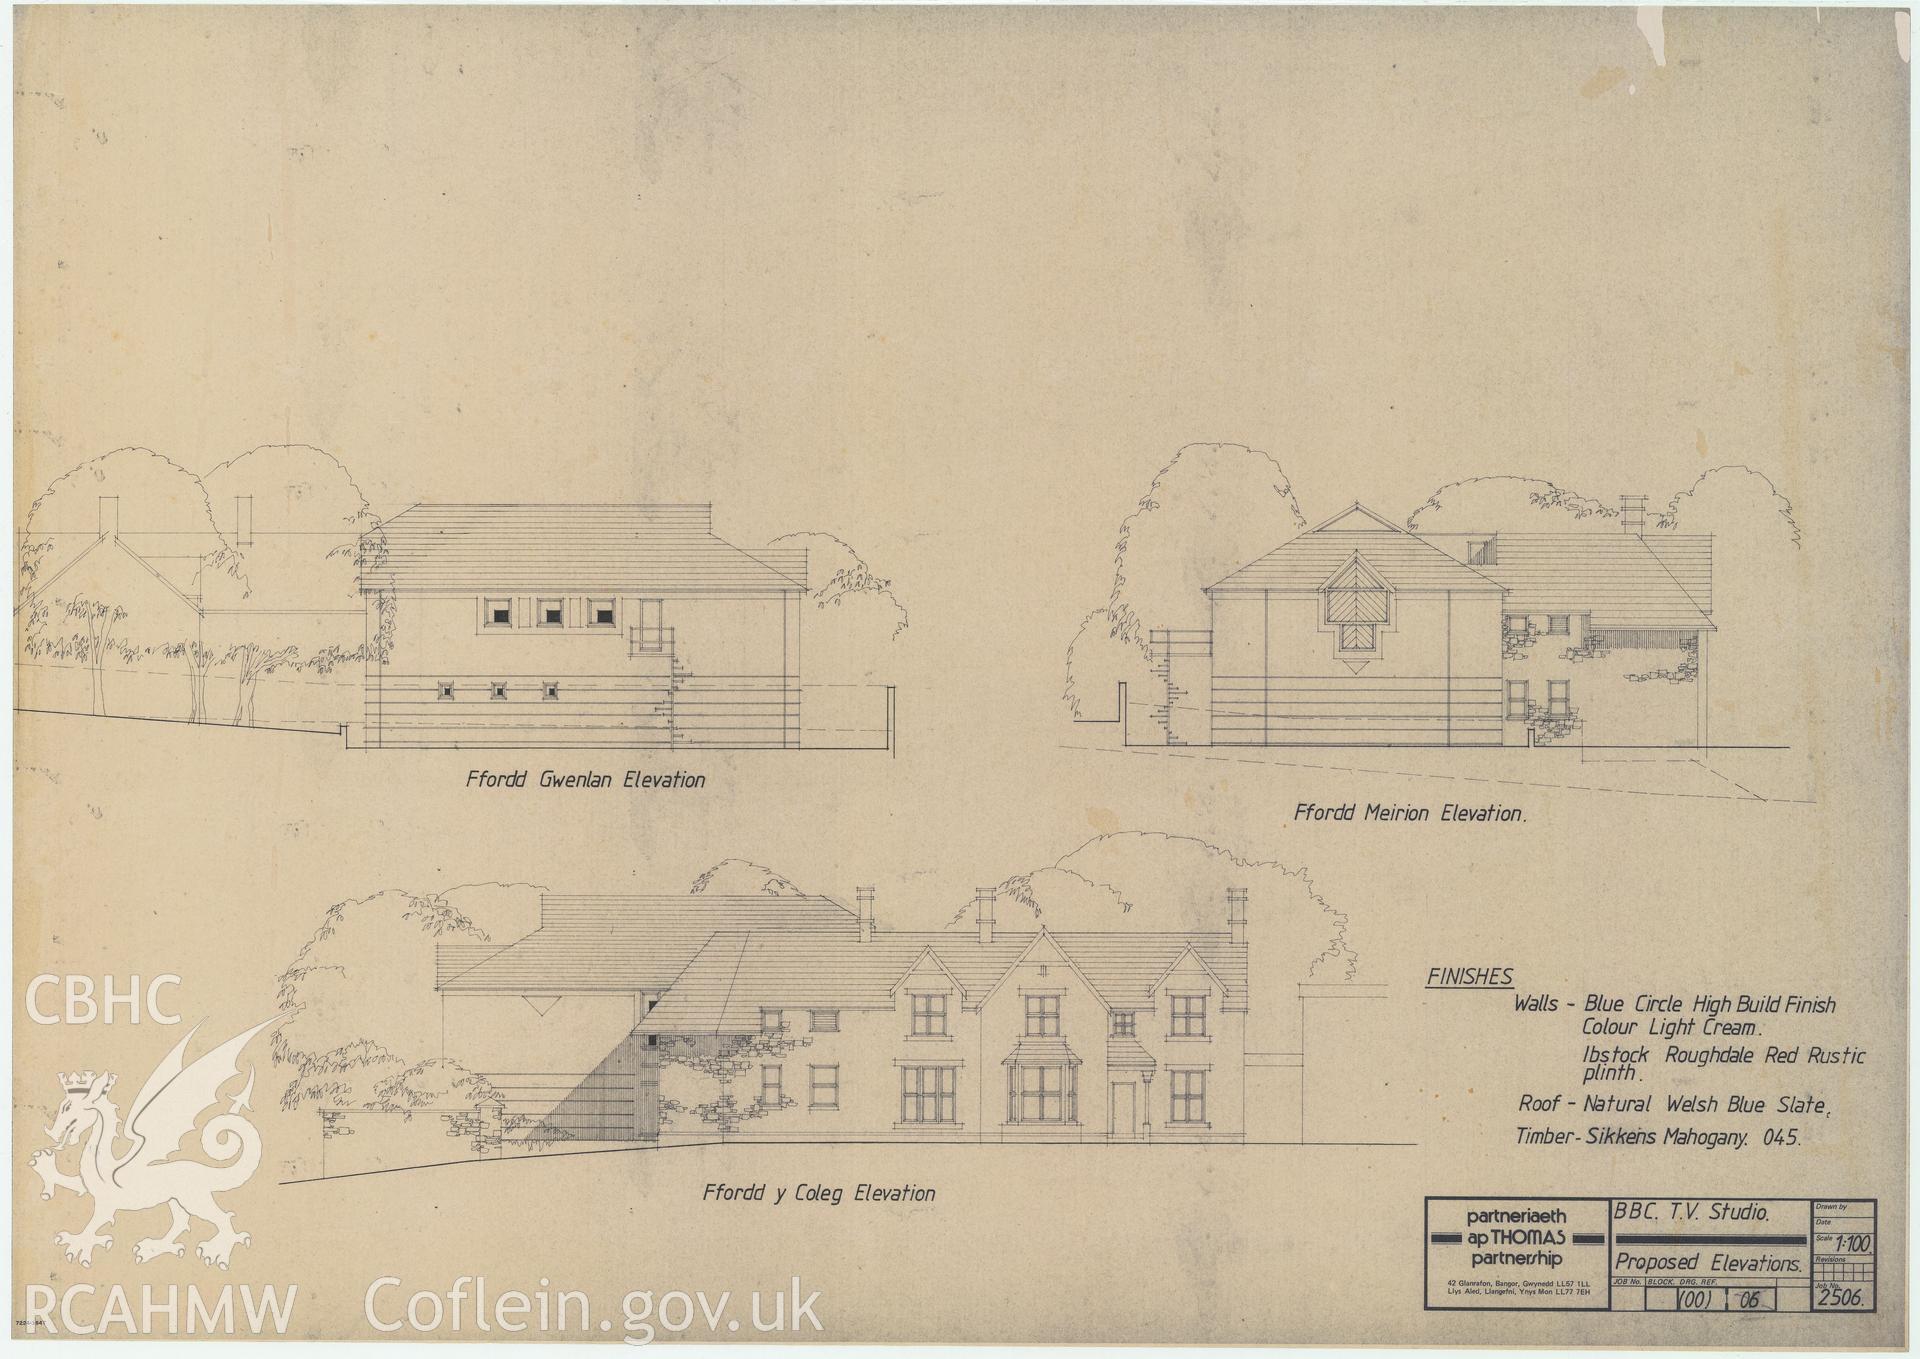 BBC premises, Broadcasting House, Bangor - elevation drawing proposals of Bryn Meirion. Drawing No. (00) 06, July 1988.